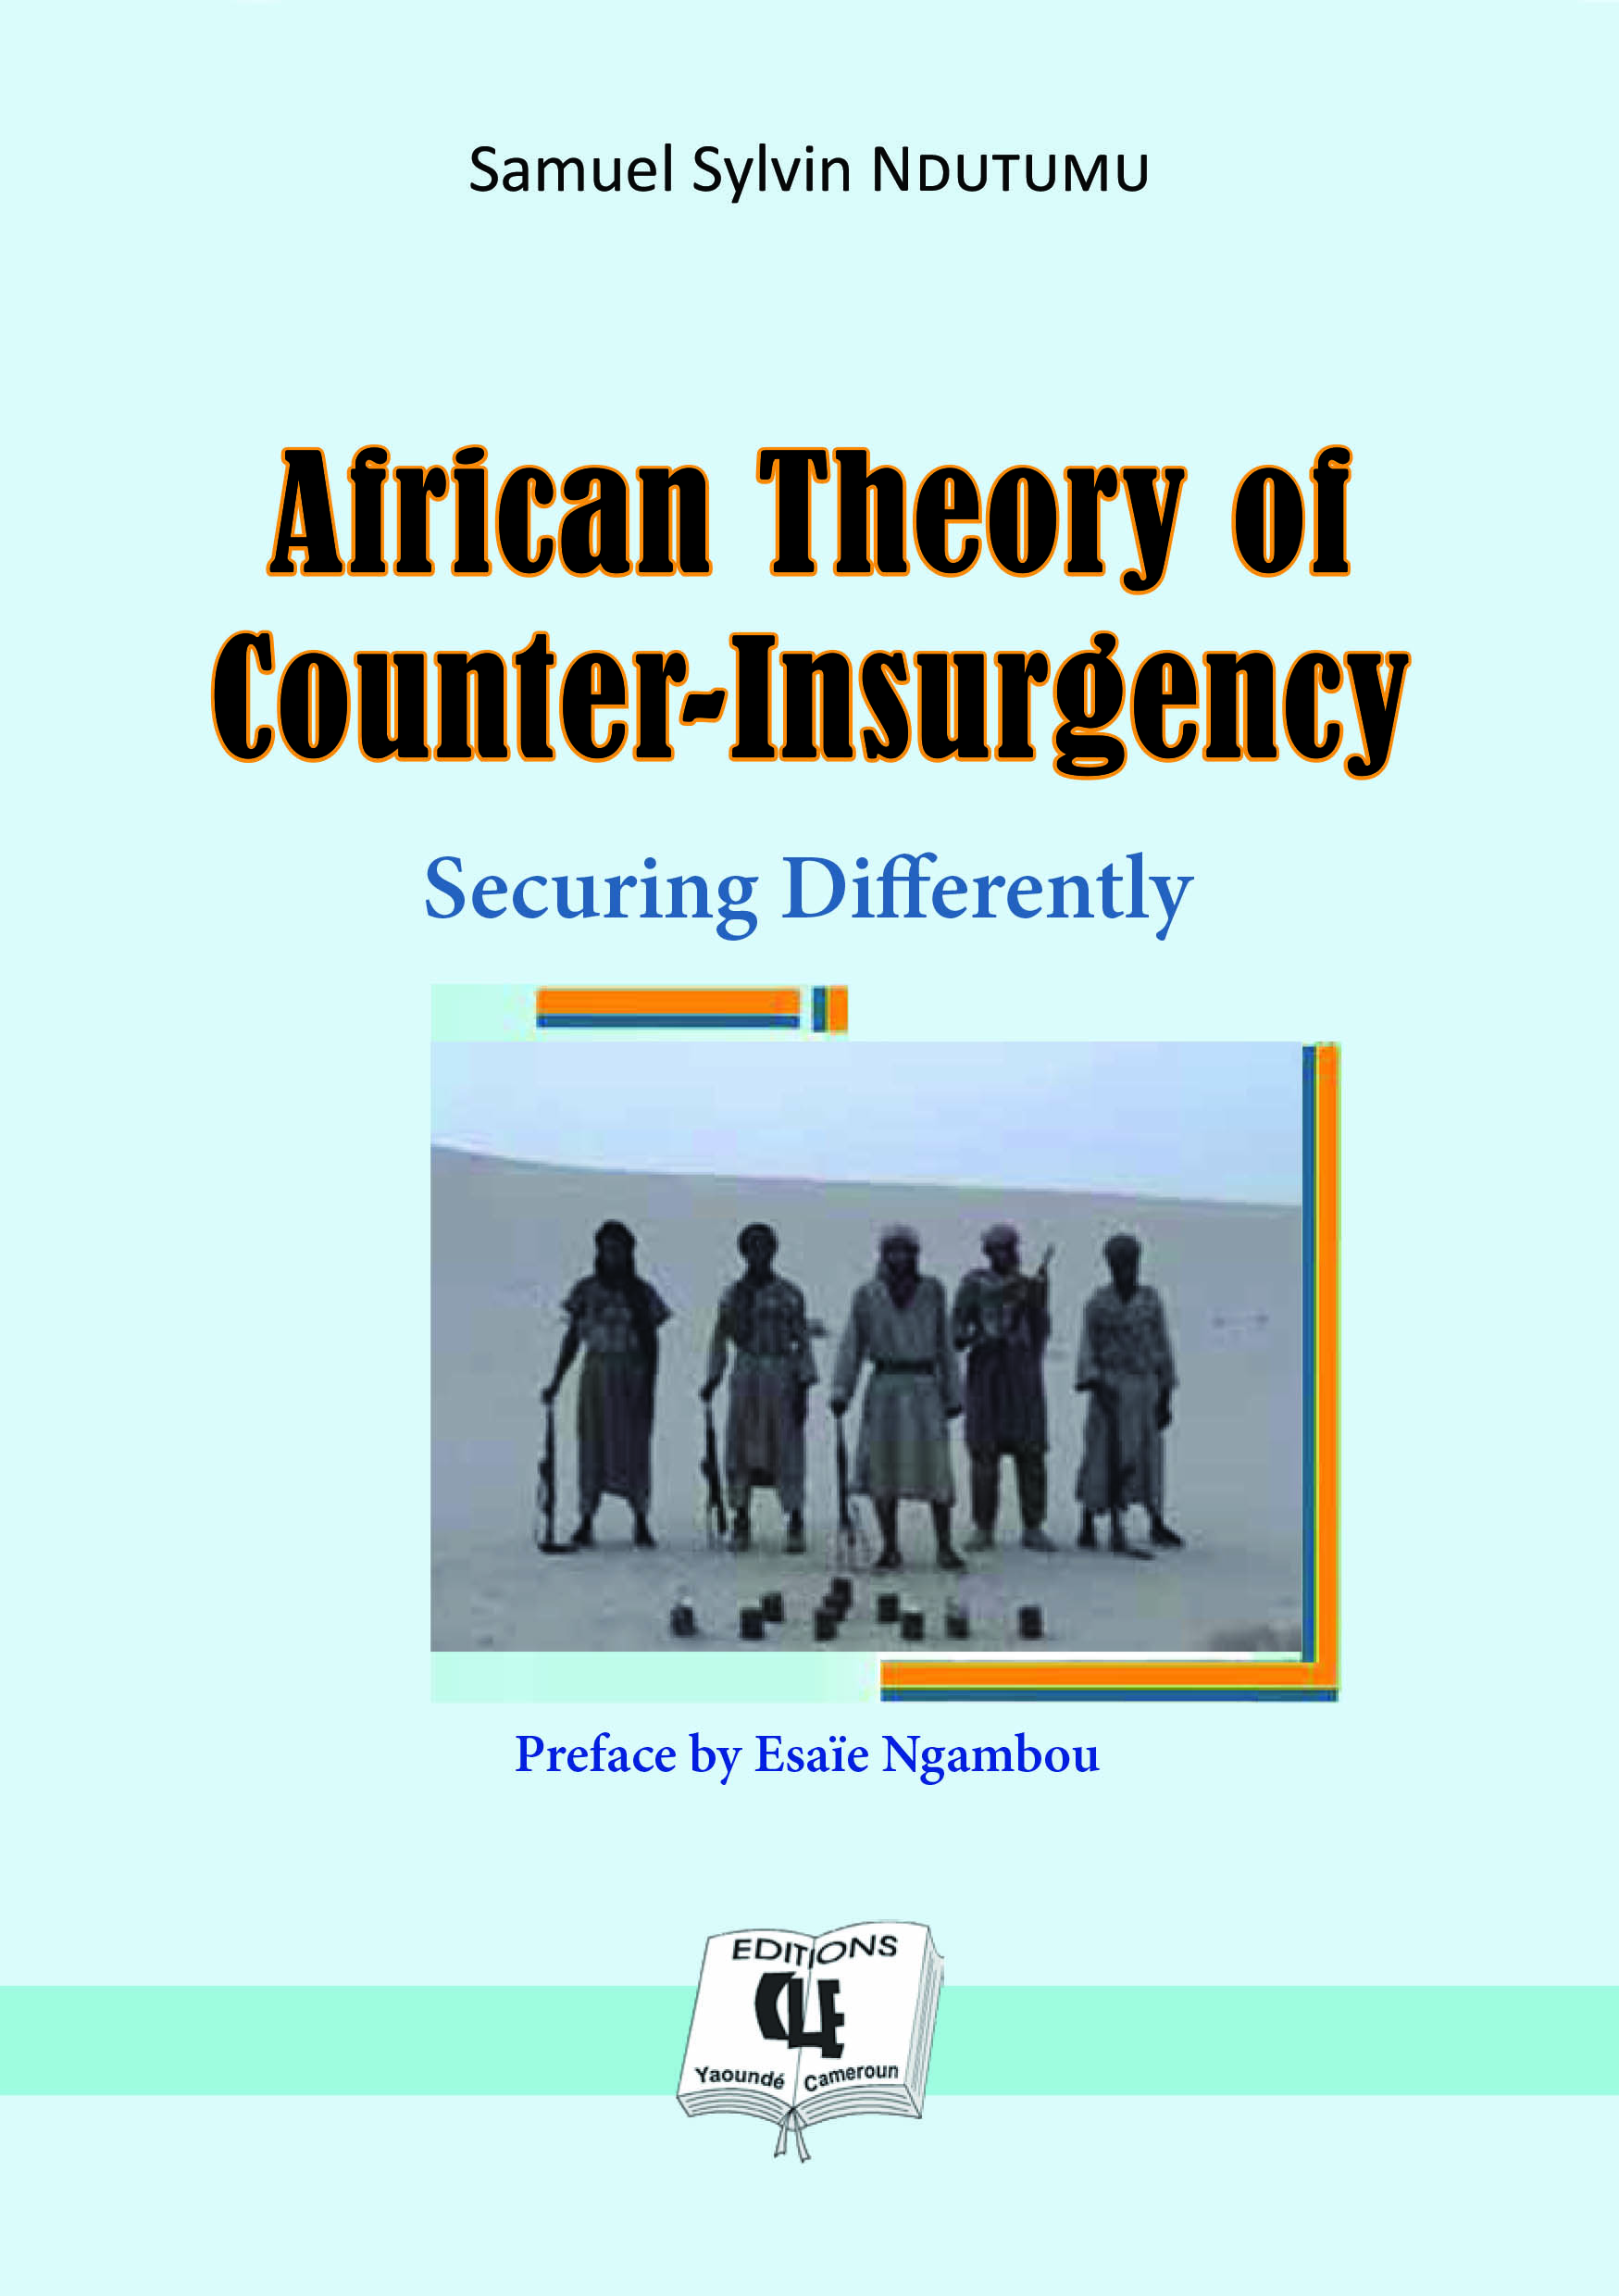 African Theory of Counter-Insurgency Securing Differently